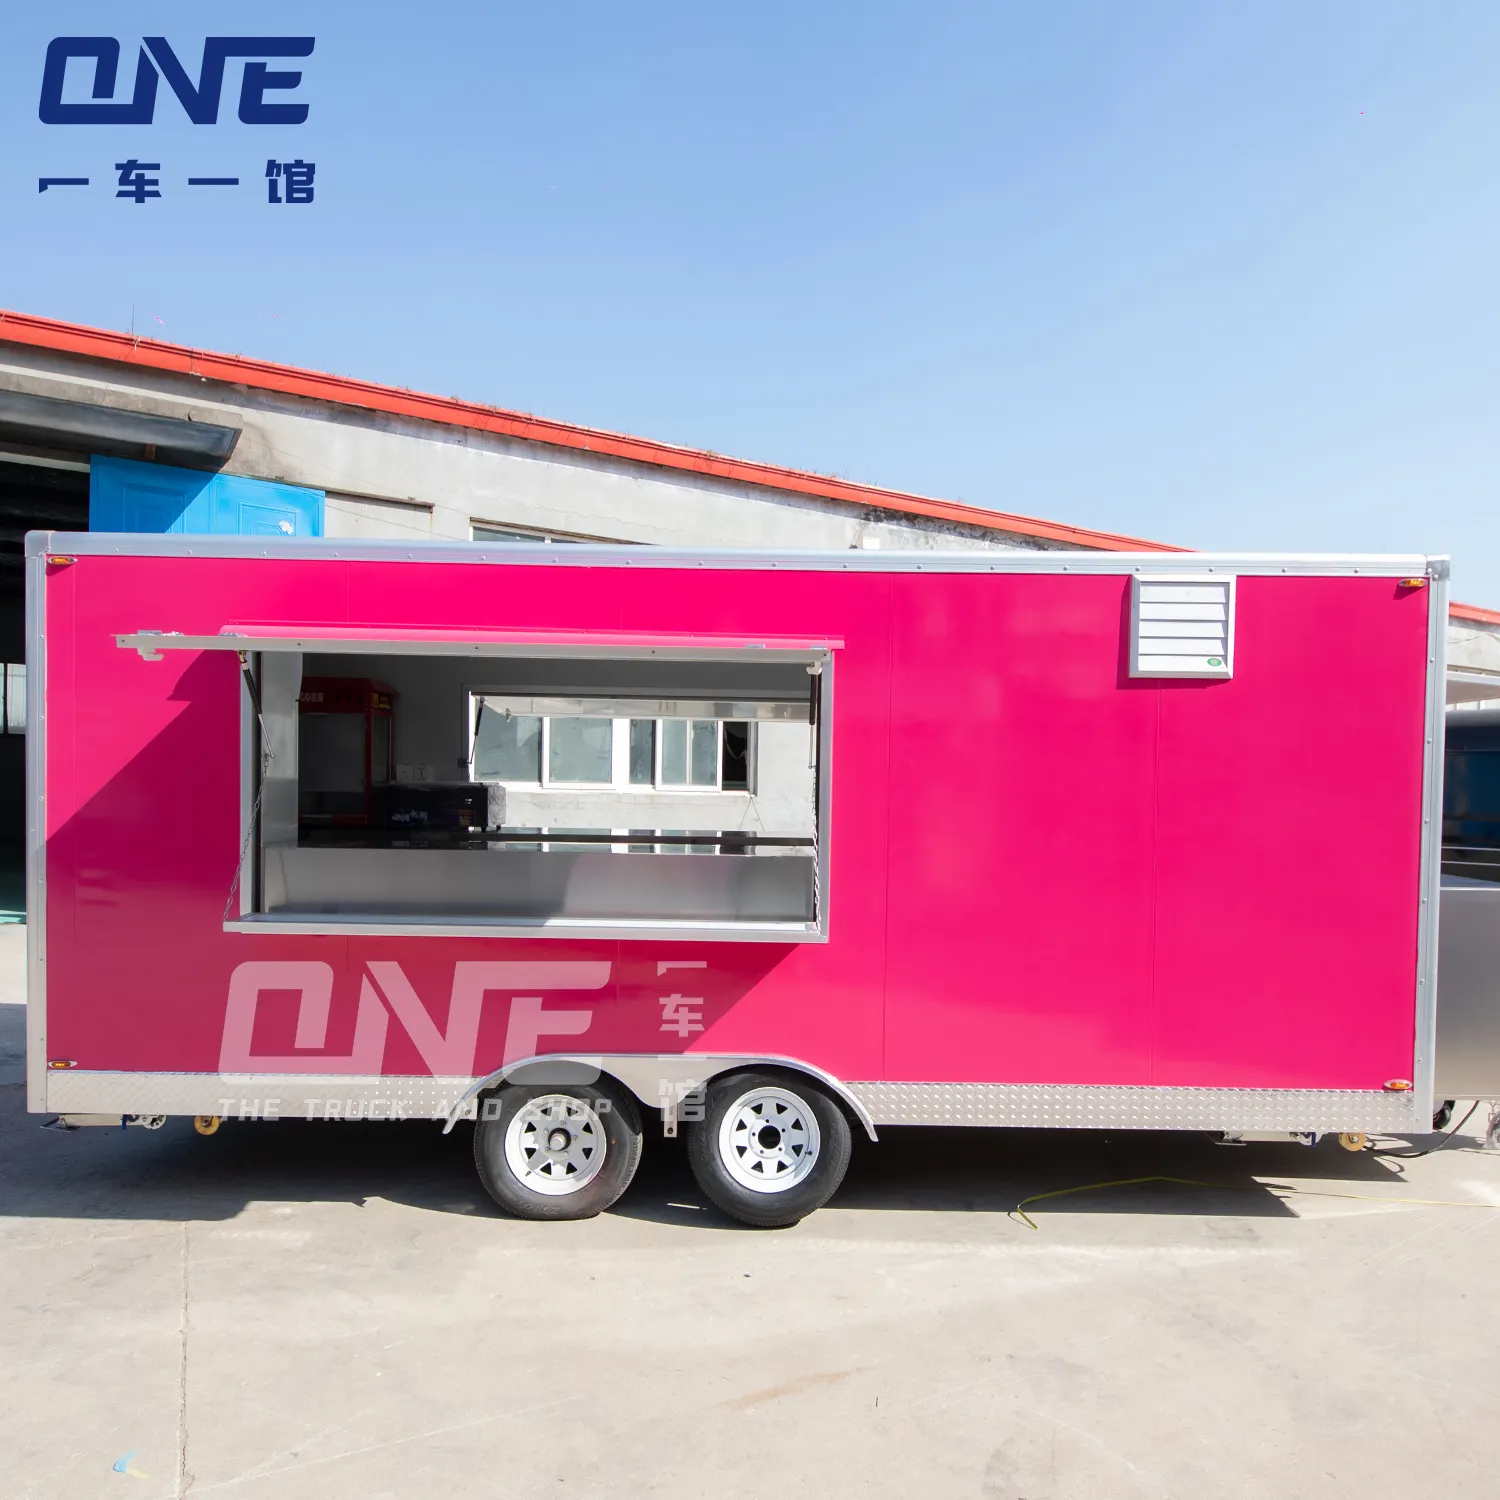 mobile salon food truck pink hot dog stand mobile kitchen ice cream kiosk hot dog cart with grill and deep fryer food trailer